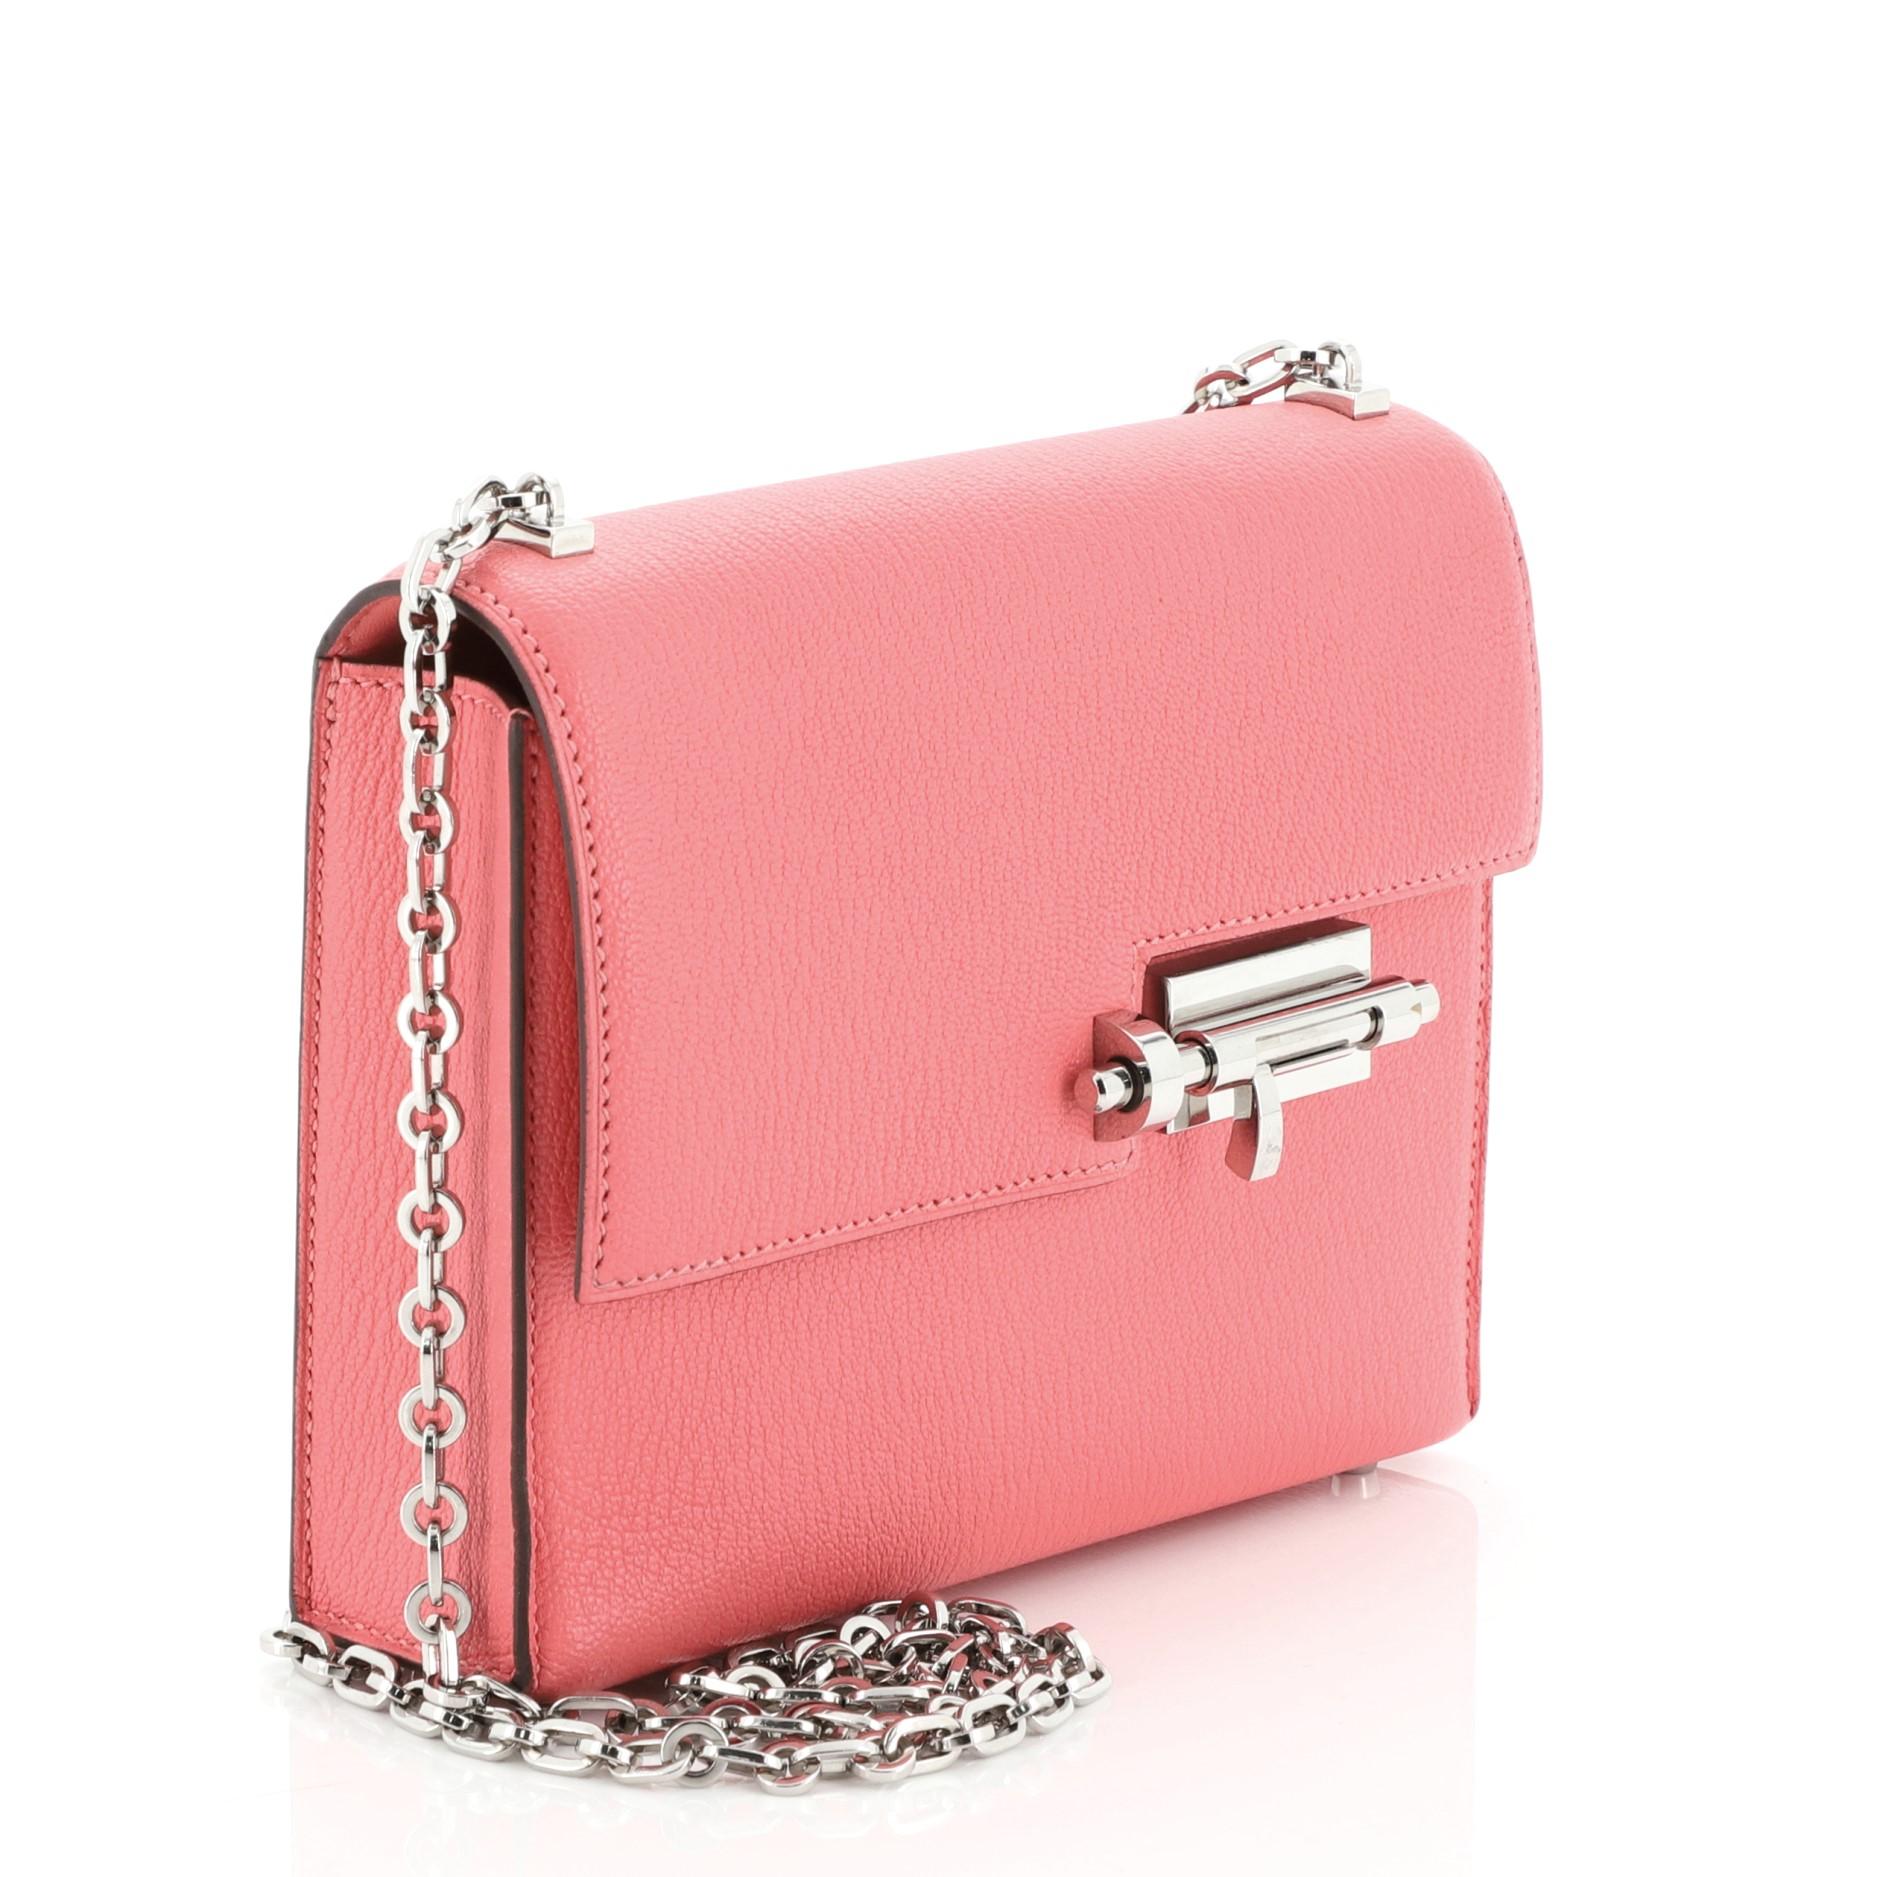 This Hermes Verrou Chaine Bag Chevre Mysore Mini, crafted from Rose Lipstick pink Chevre Mysore leather, features chain link strap, frontal flap and palladium hardware. Its slide-lock closure opens to a Rose Lipstick pink Agneau leather interior